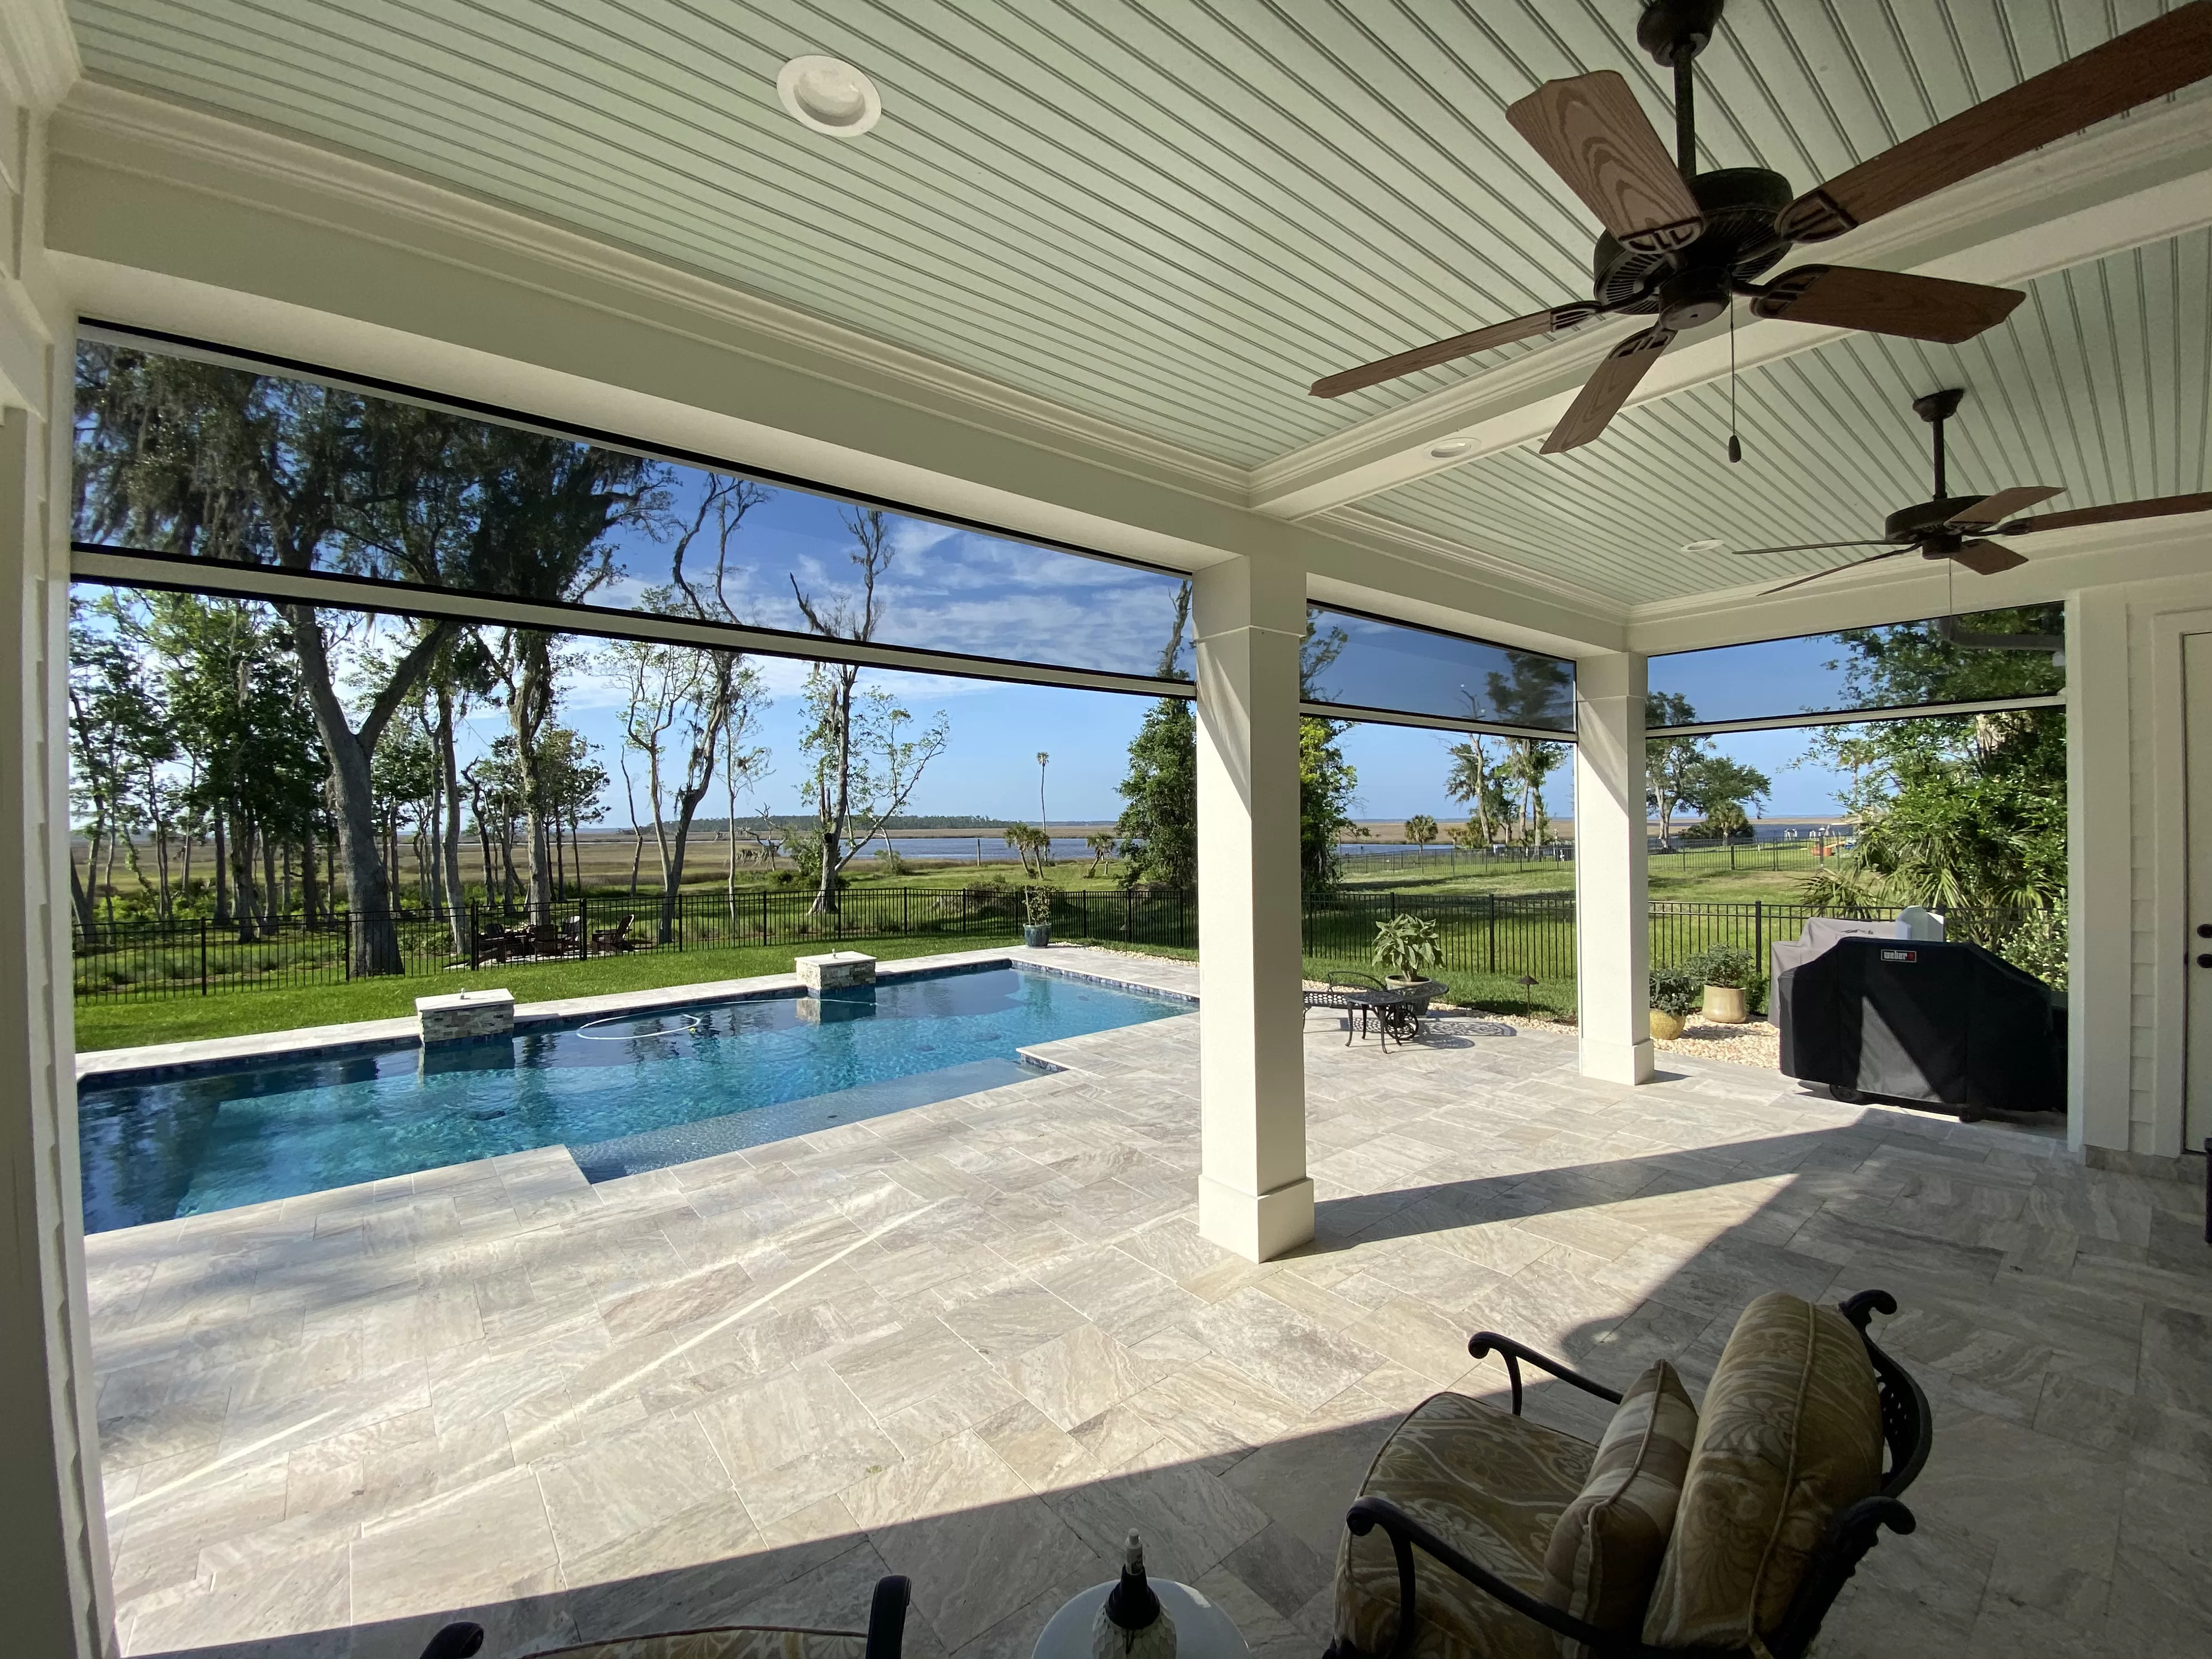 Retractable screens are the perfect addition to this patio.